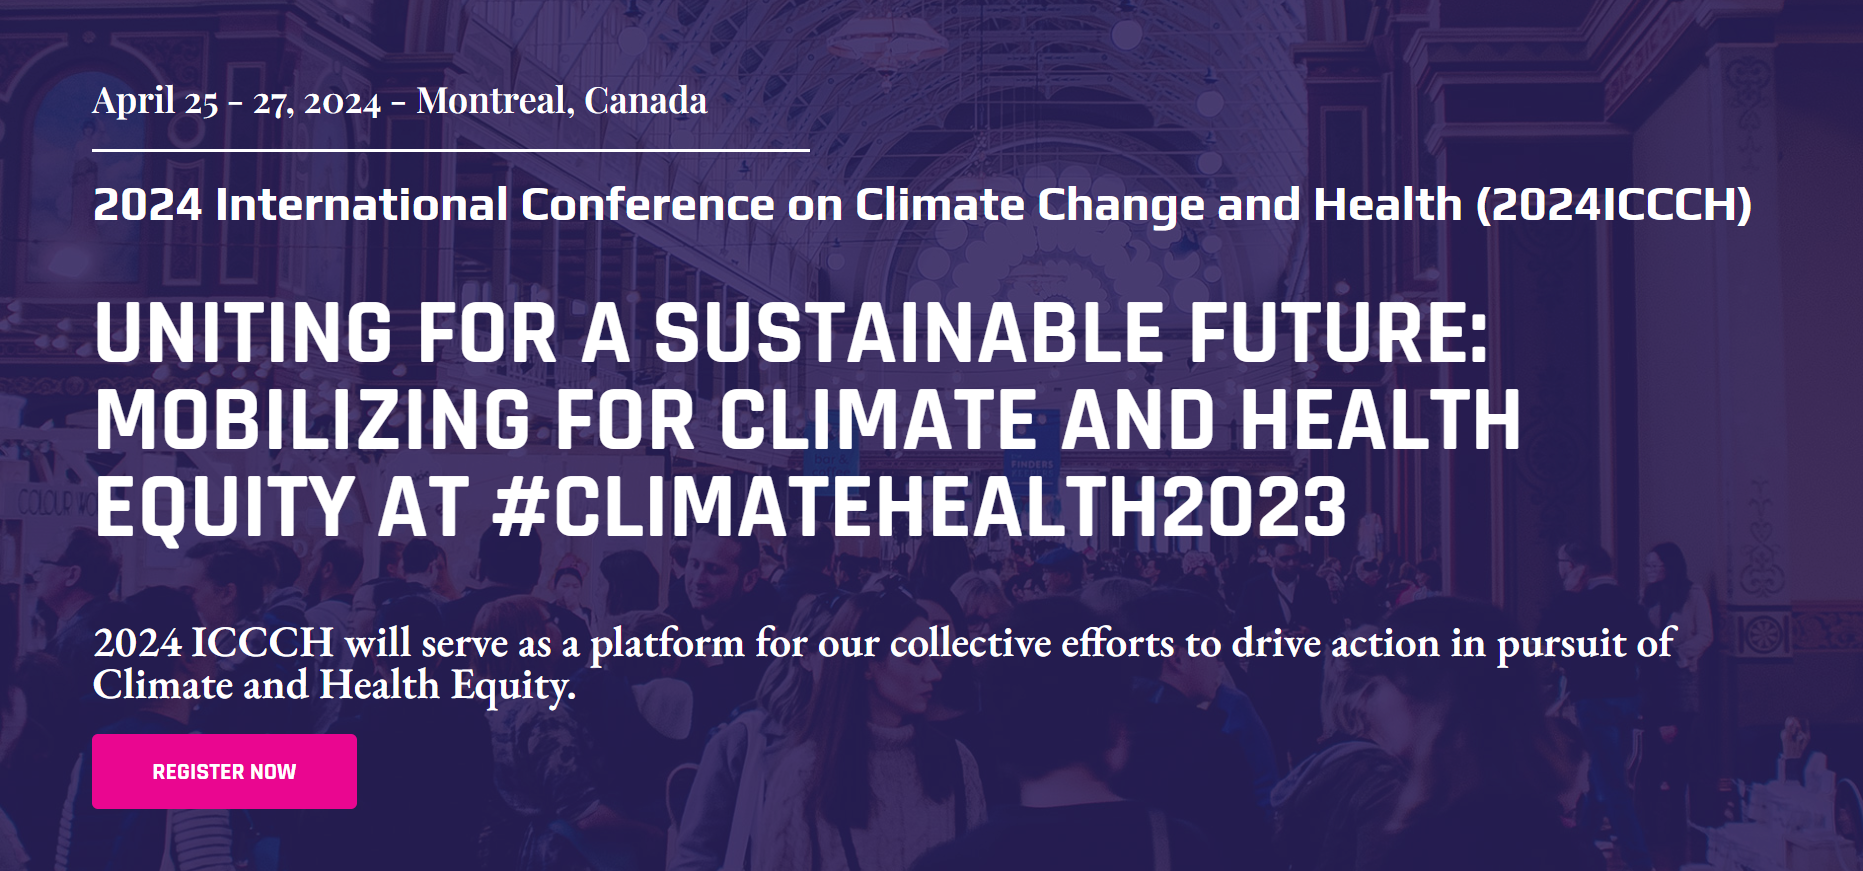 2024 International Conference on Climate Change and Health (2024ICCCH)